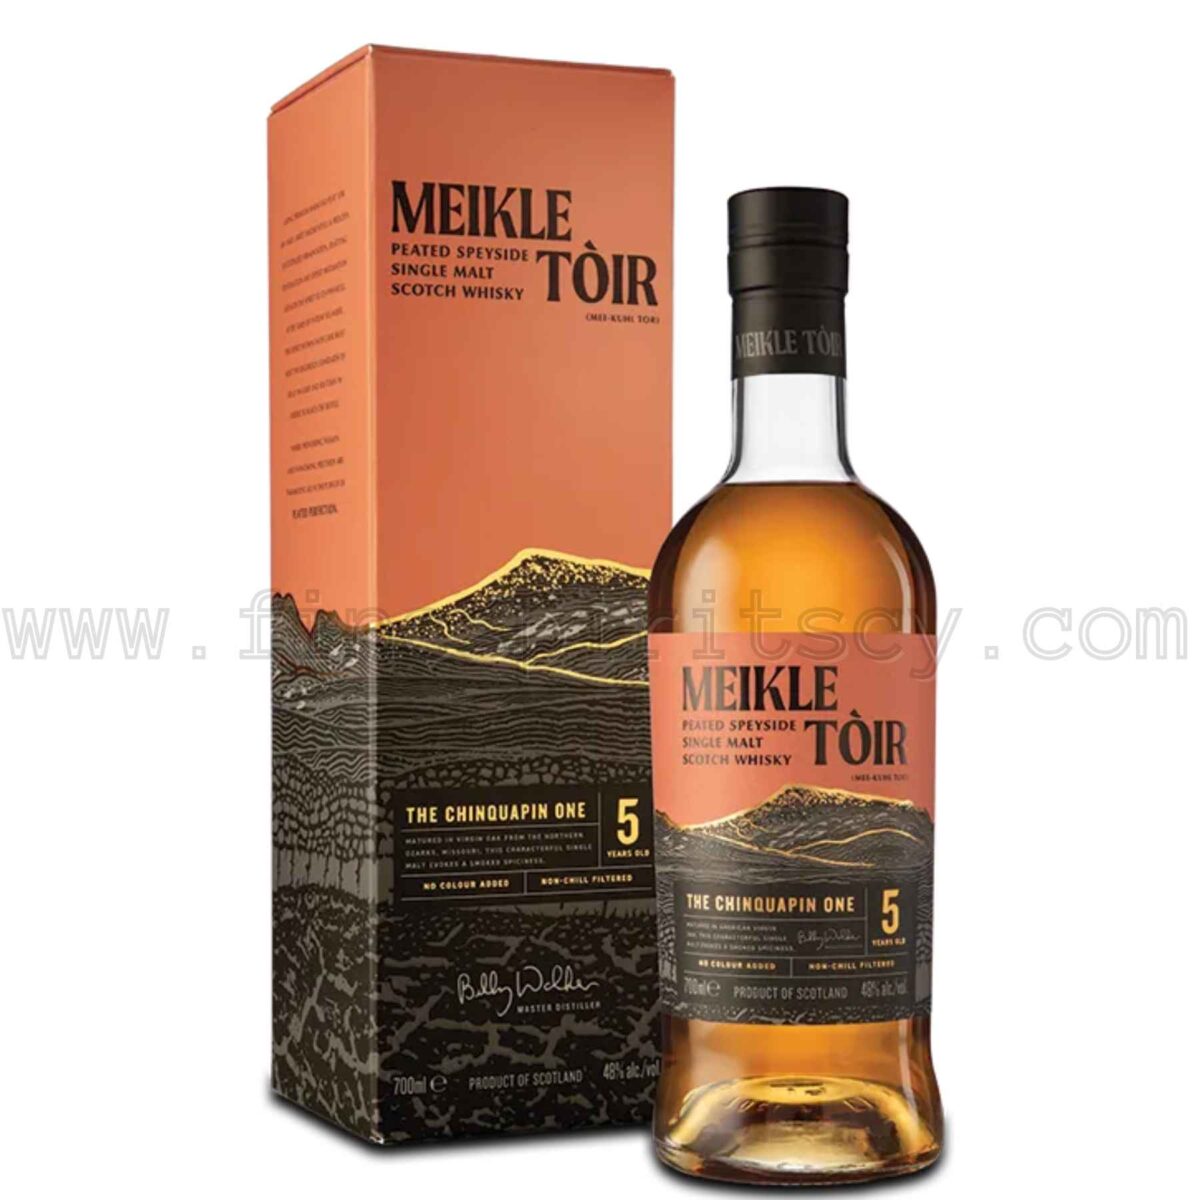 Meikle Toir The Chinquapin One 5 Year Old 700ml 70cl 0.7L